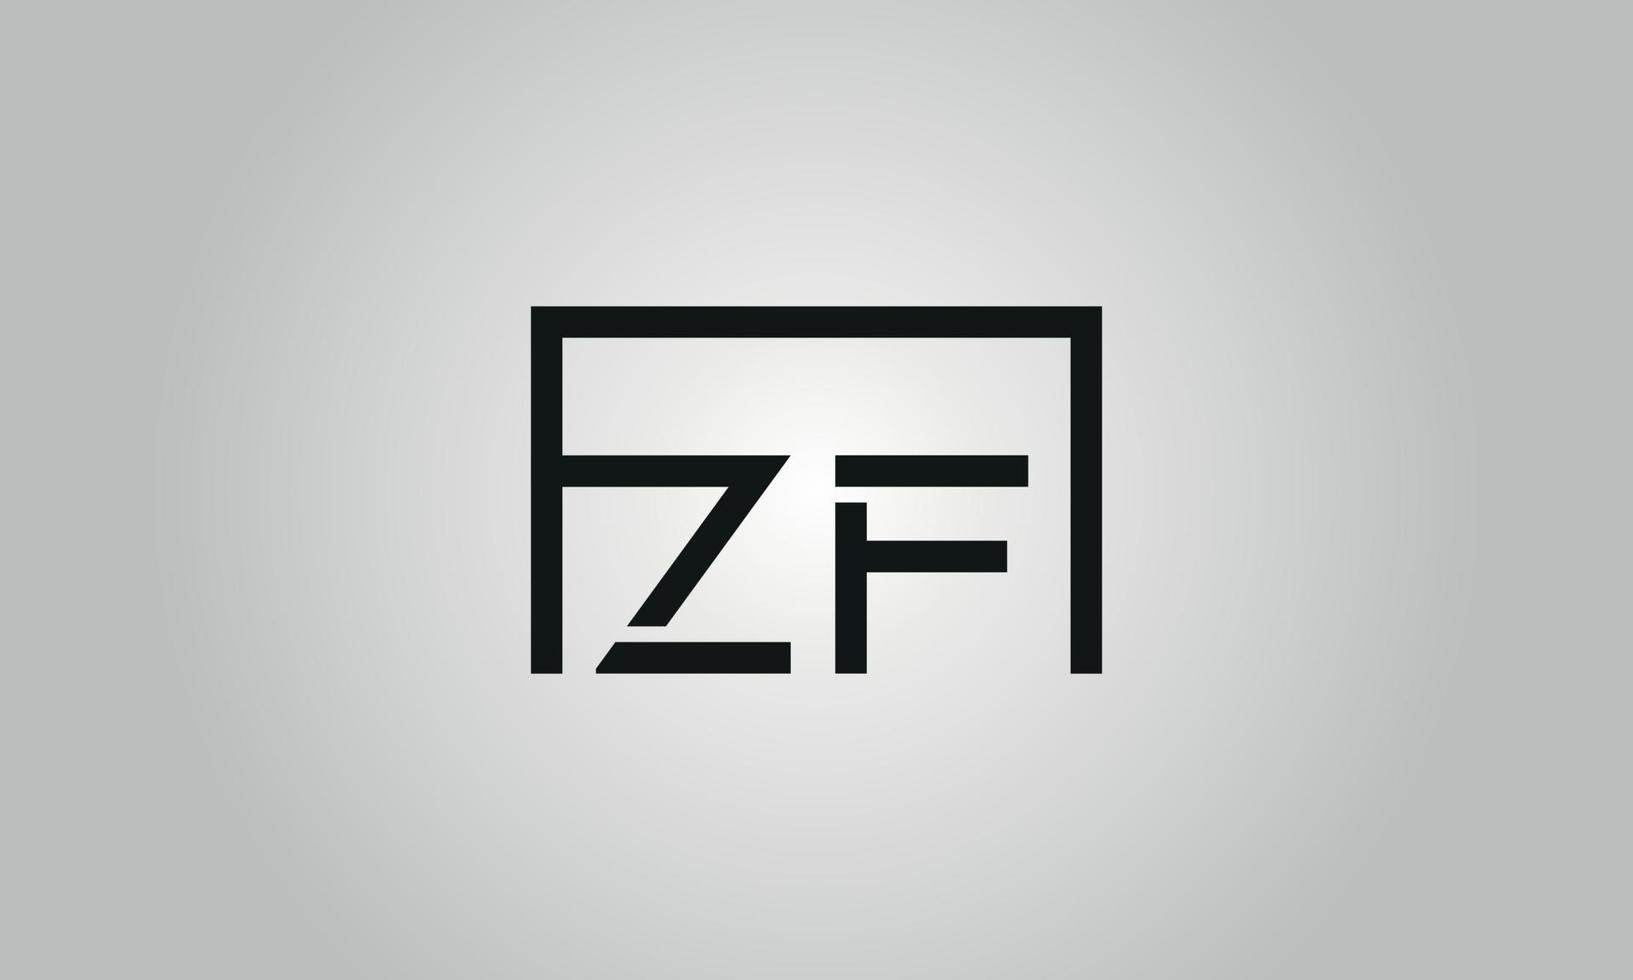 Letter ZF logo design. ZF logo with square shape in black colors vector free vector template.